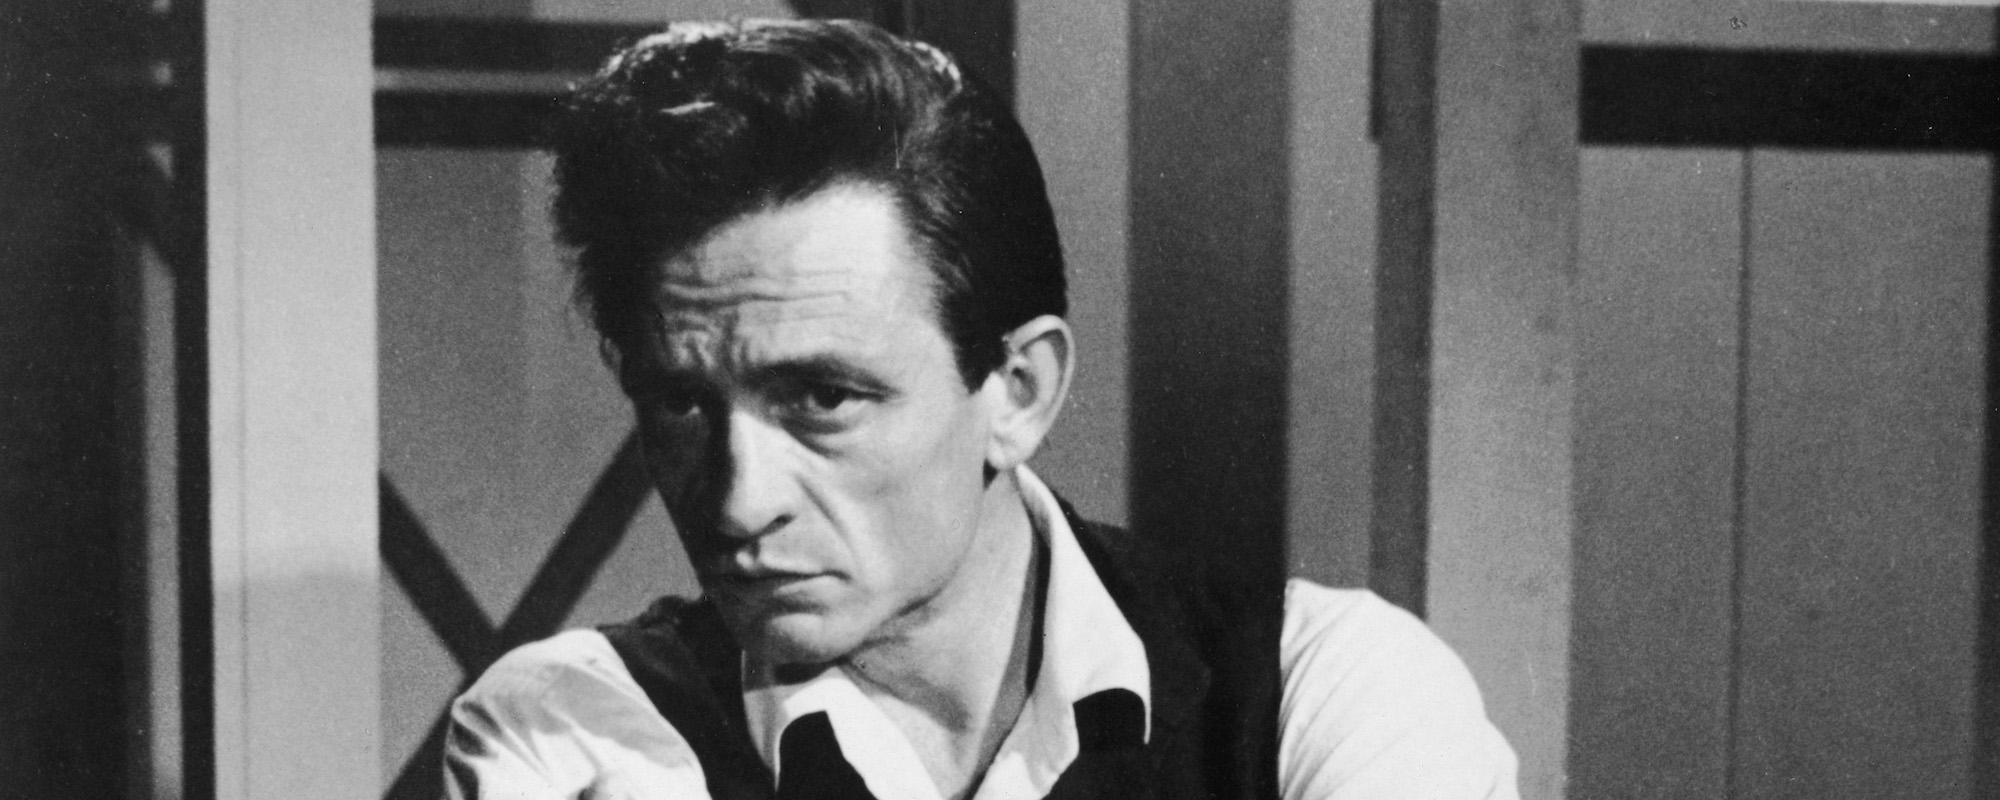 The Homicidal Meaning Behind Johnny Cash’s “Cocaine Blues”